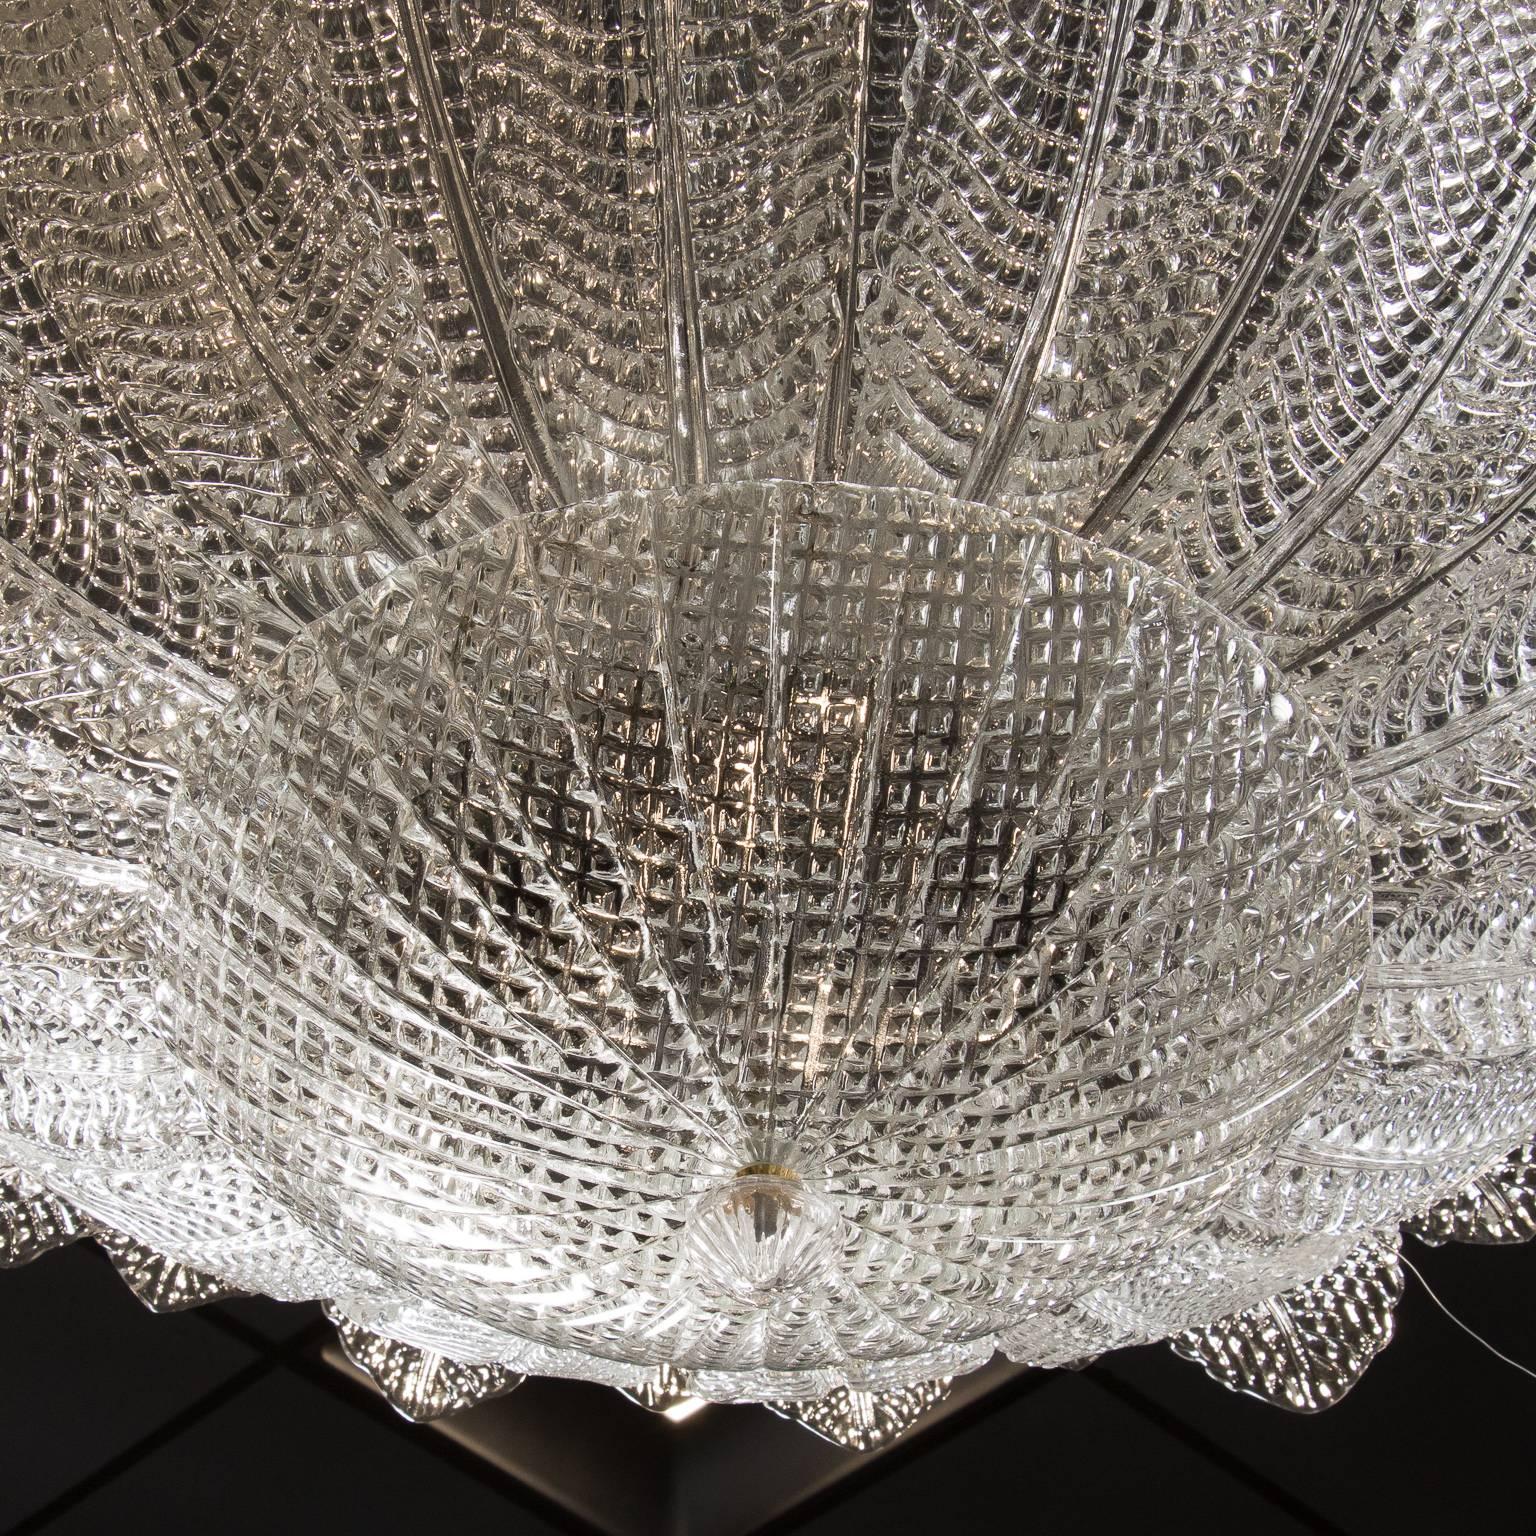 Large Barovier & Toso fixture measure is 40” in diameter with handblown centre bowl surrounded by curved clear glass feather or leaf pieces that give the fixture a flower-like form, circa 2010. Fixture has a total of nine full size sockets. Fixture